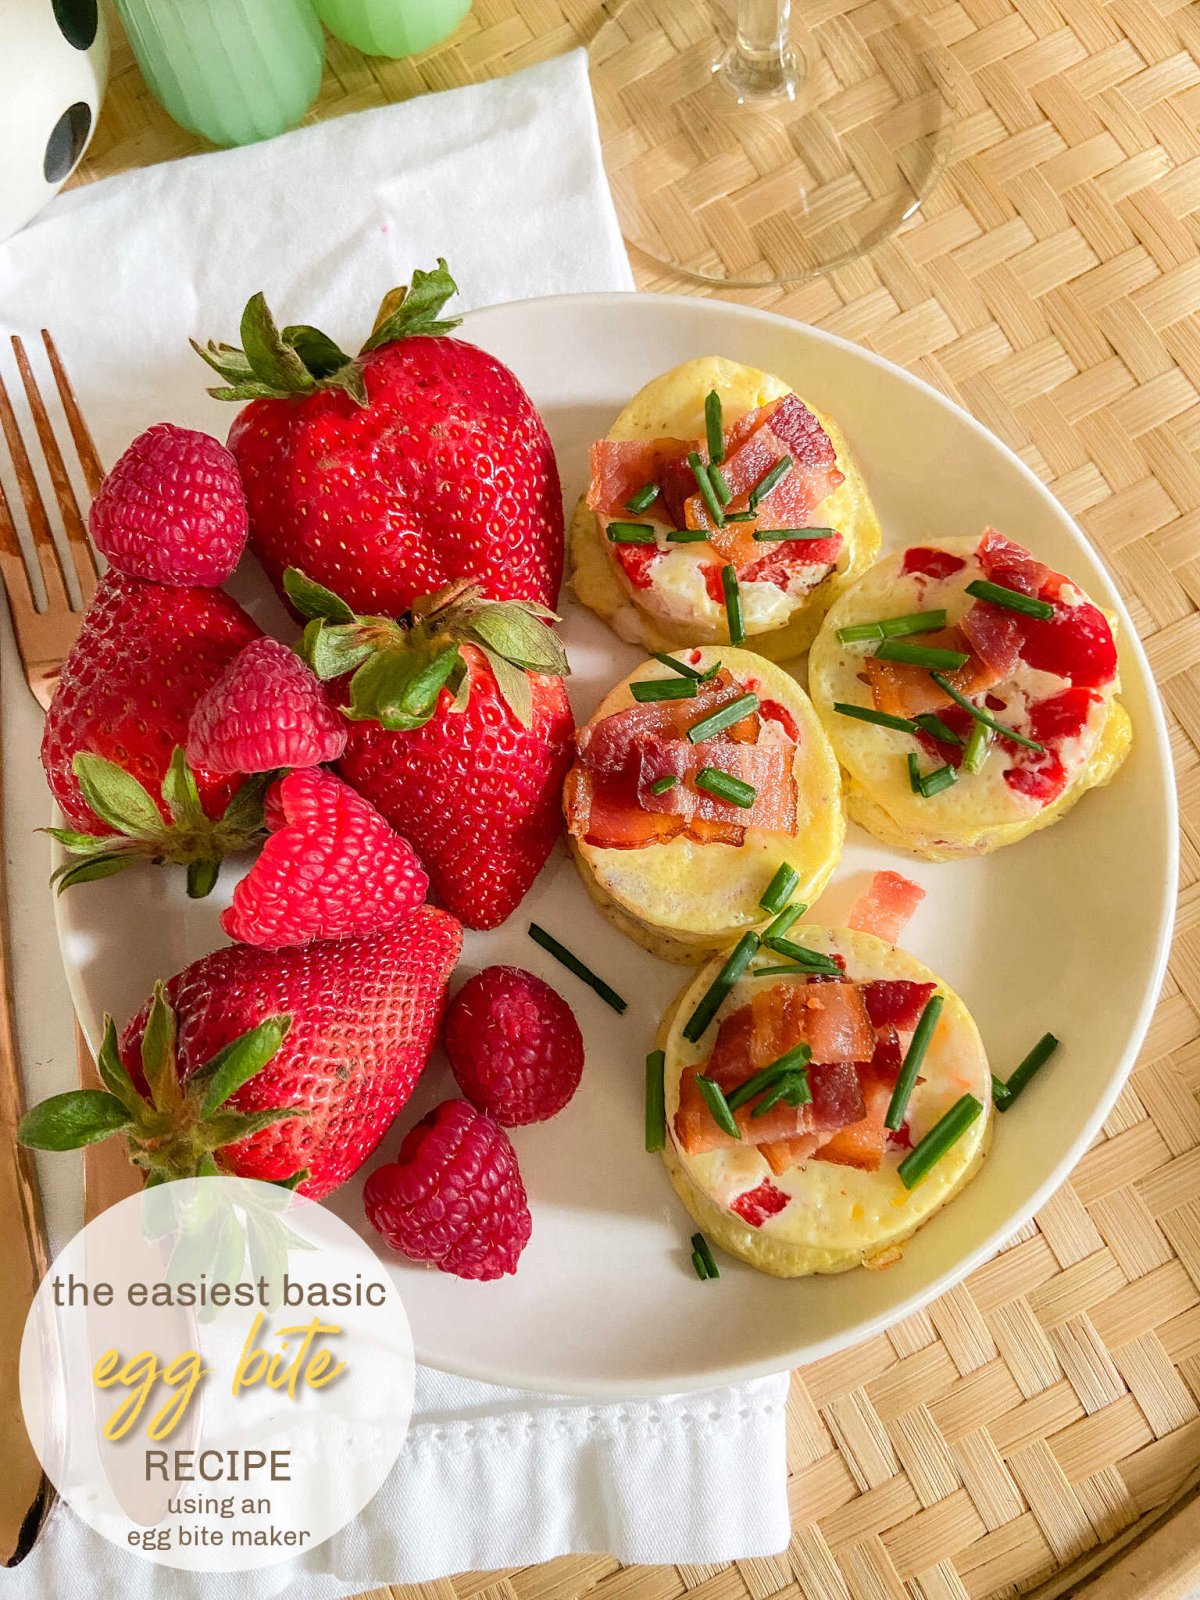 Bacon and Red Pepper Egg Bites. Egg bites are perfect for breakfast or anytime. You can make your own in no time with this easy low carb, protein filled recipe using an Egg Bite Maker.